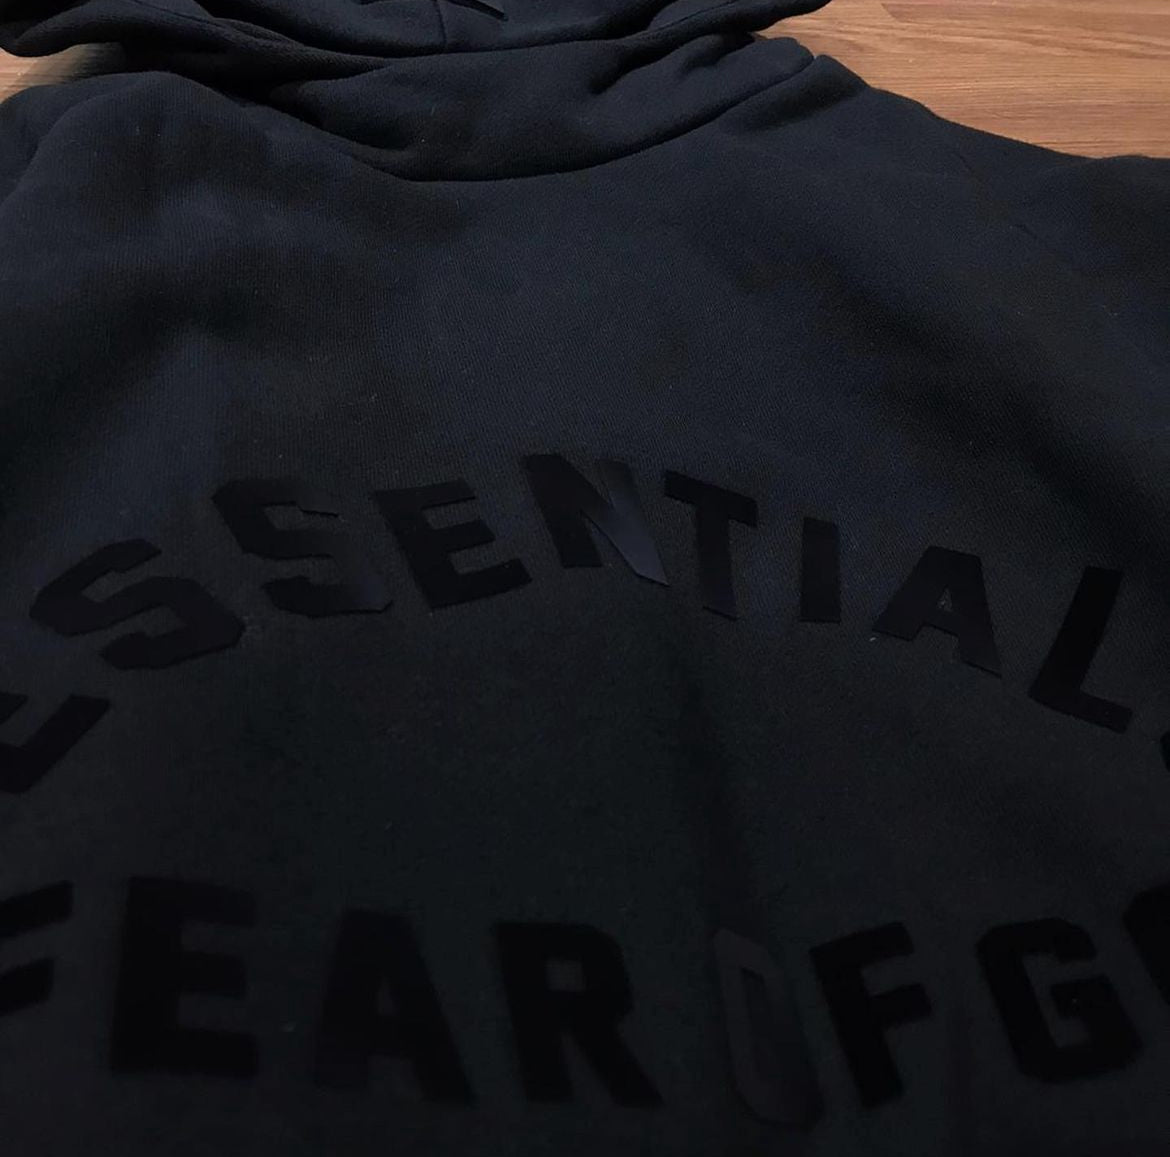 Fear of God FOG Essentials "The Black Collection" Sweat Crewneck / Hoodie